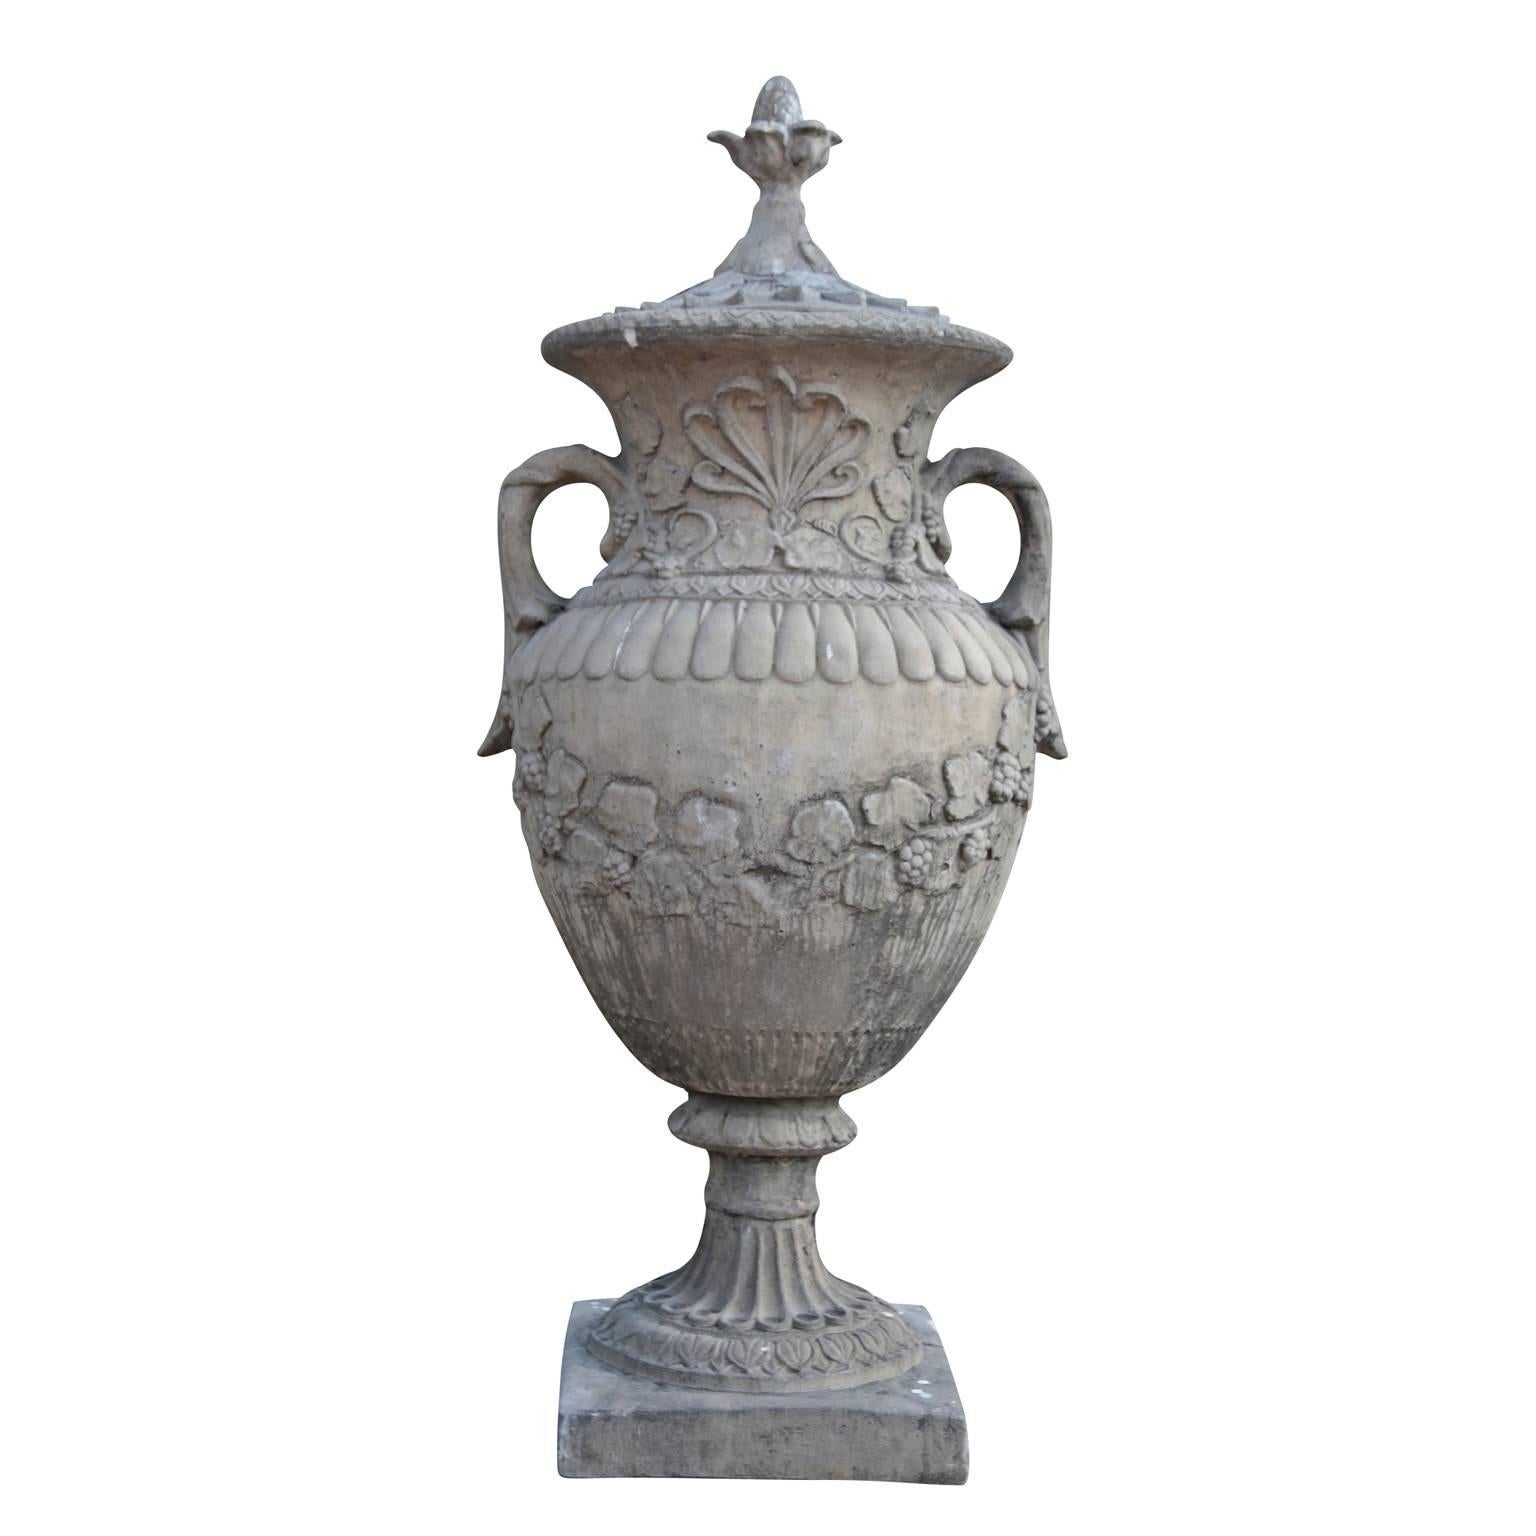 The urn stands on a square plinth and has a round foot with cymatium and tongue-elements. The wall of the body is decorated with vines and the handles are shaped like leaves. The neck is decorated with an acanthus leaf and additional vines. The top